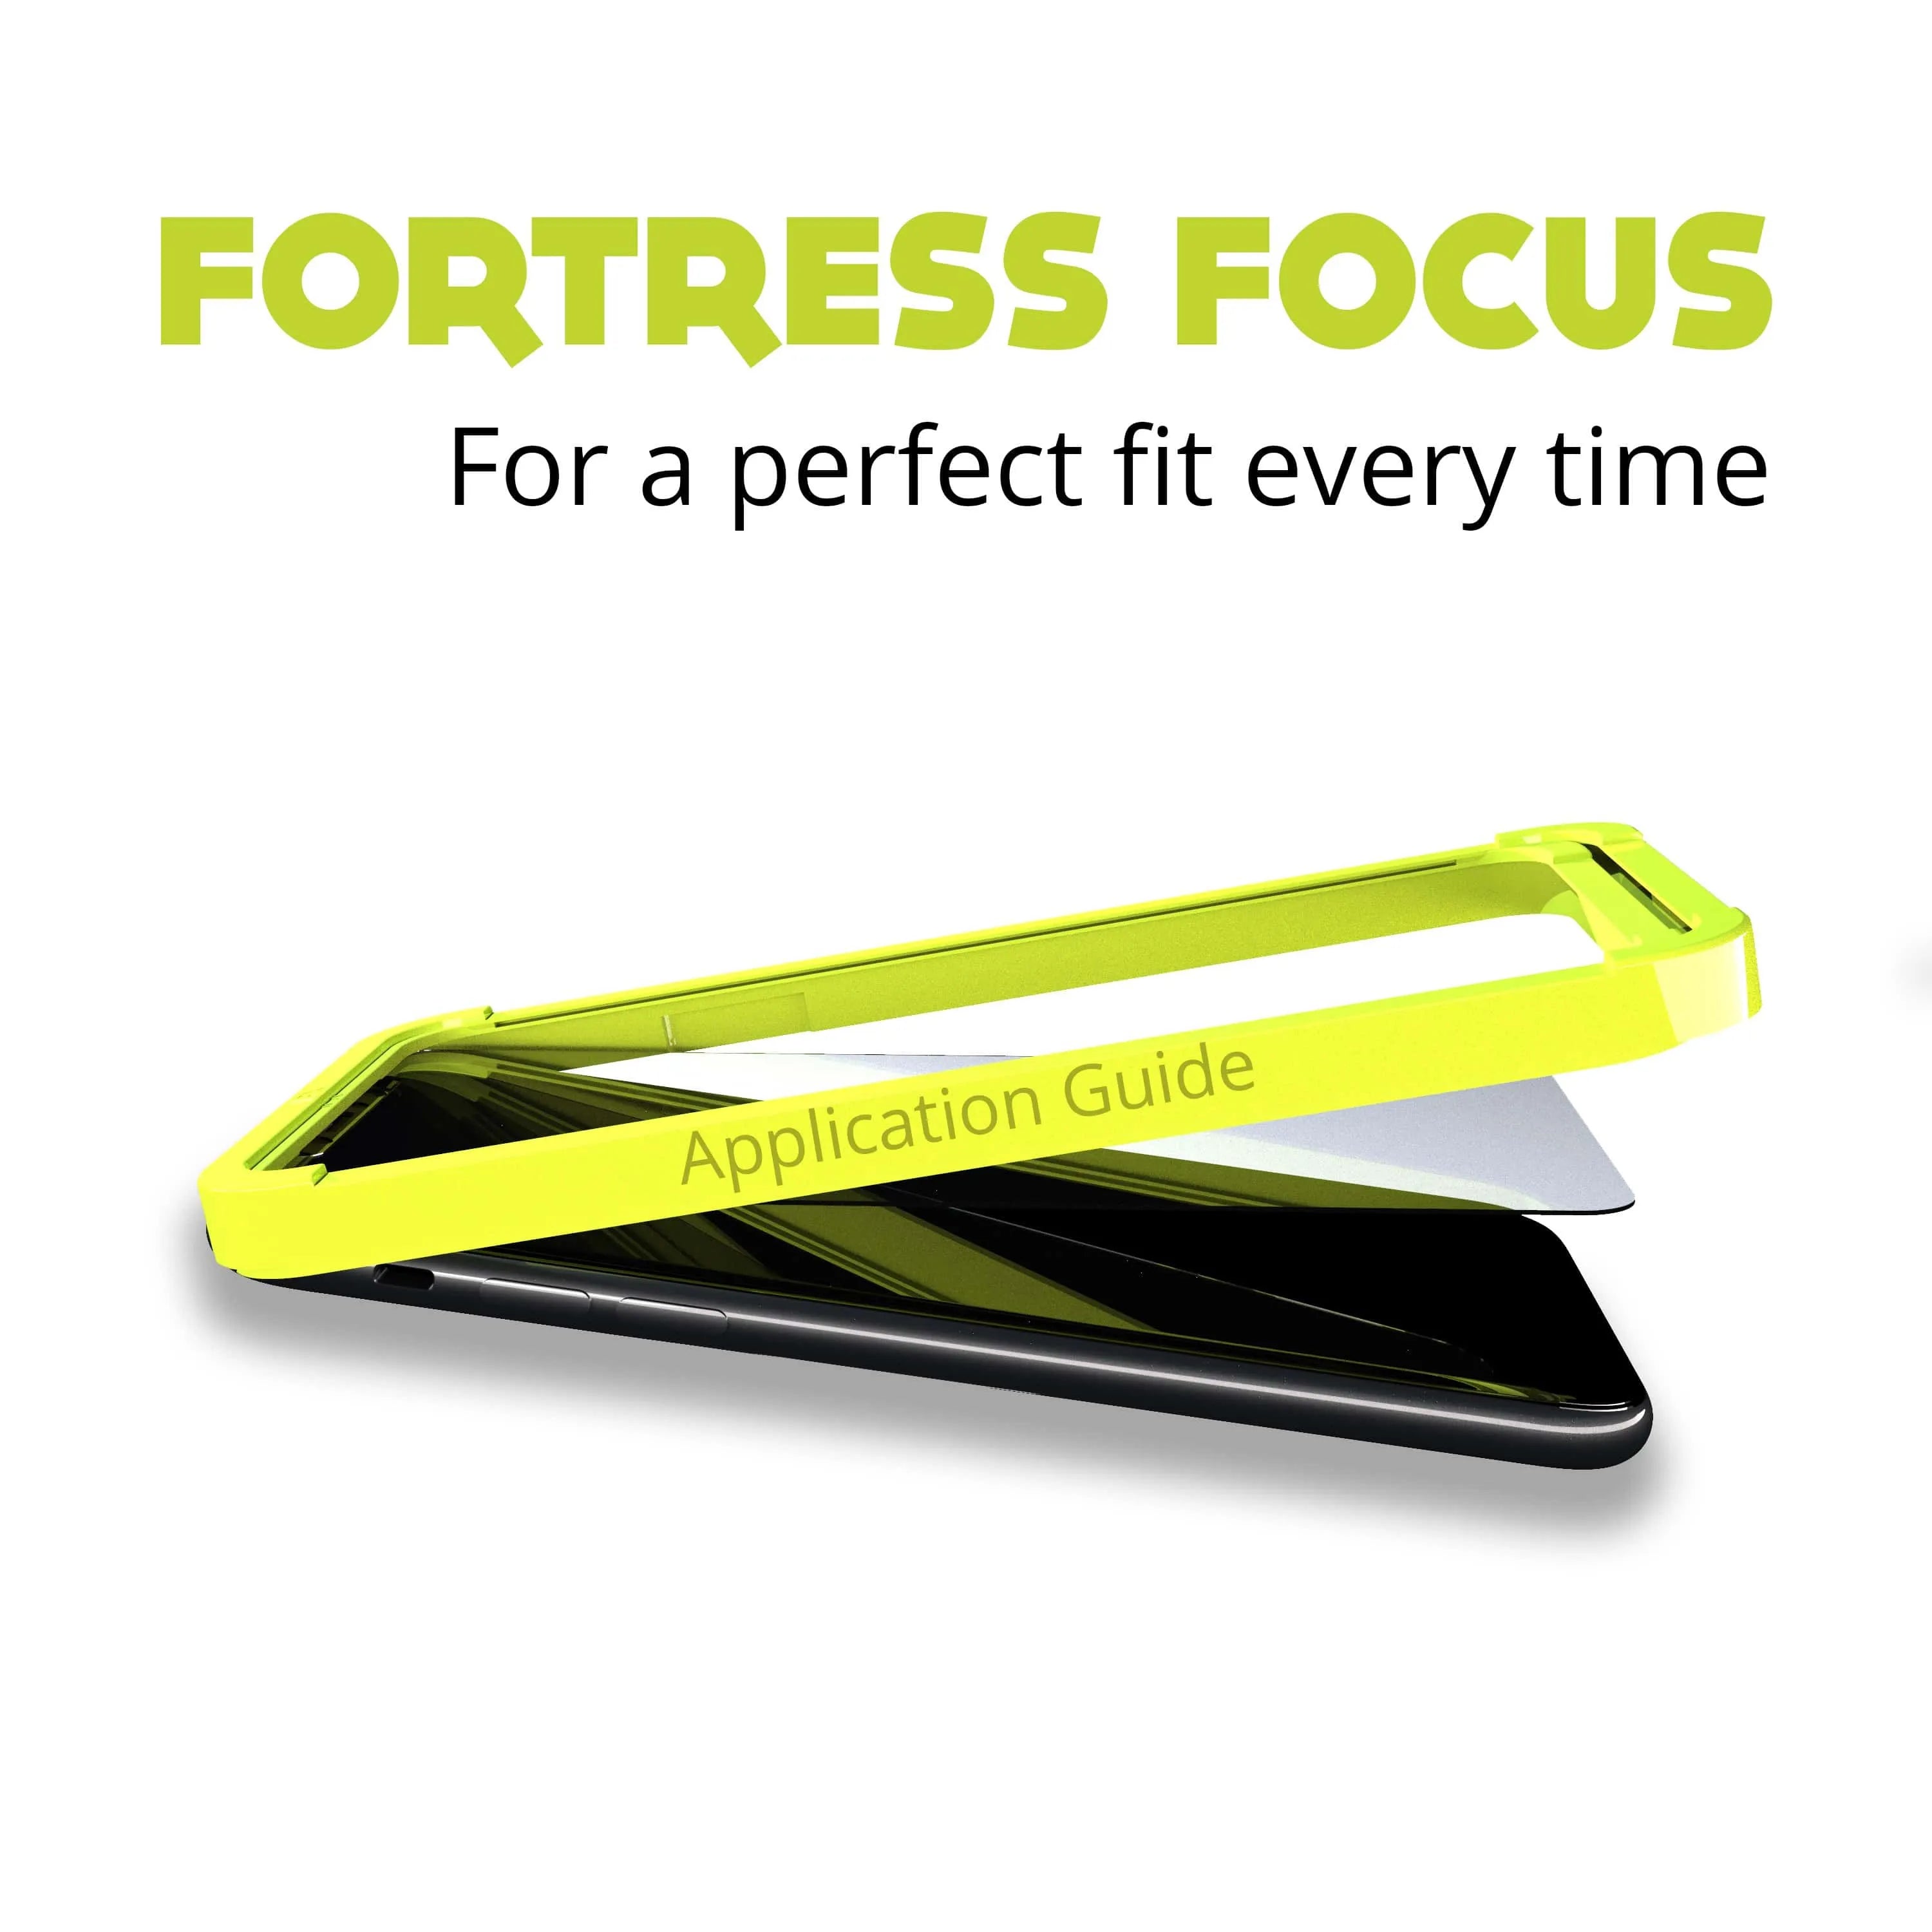 Fortress iPhone 12 Pro Screen Protector - $200 Device Coverage  Scooch Screen Protector